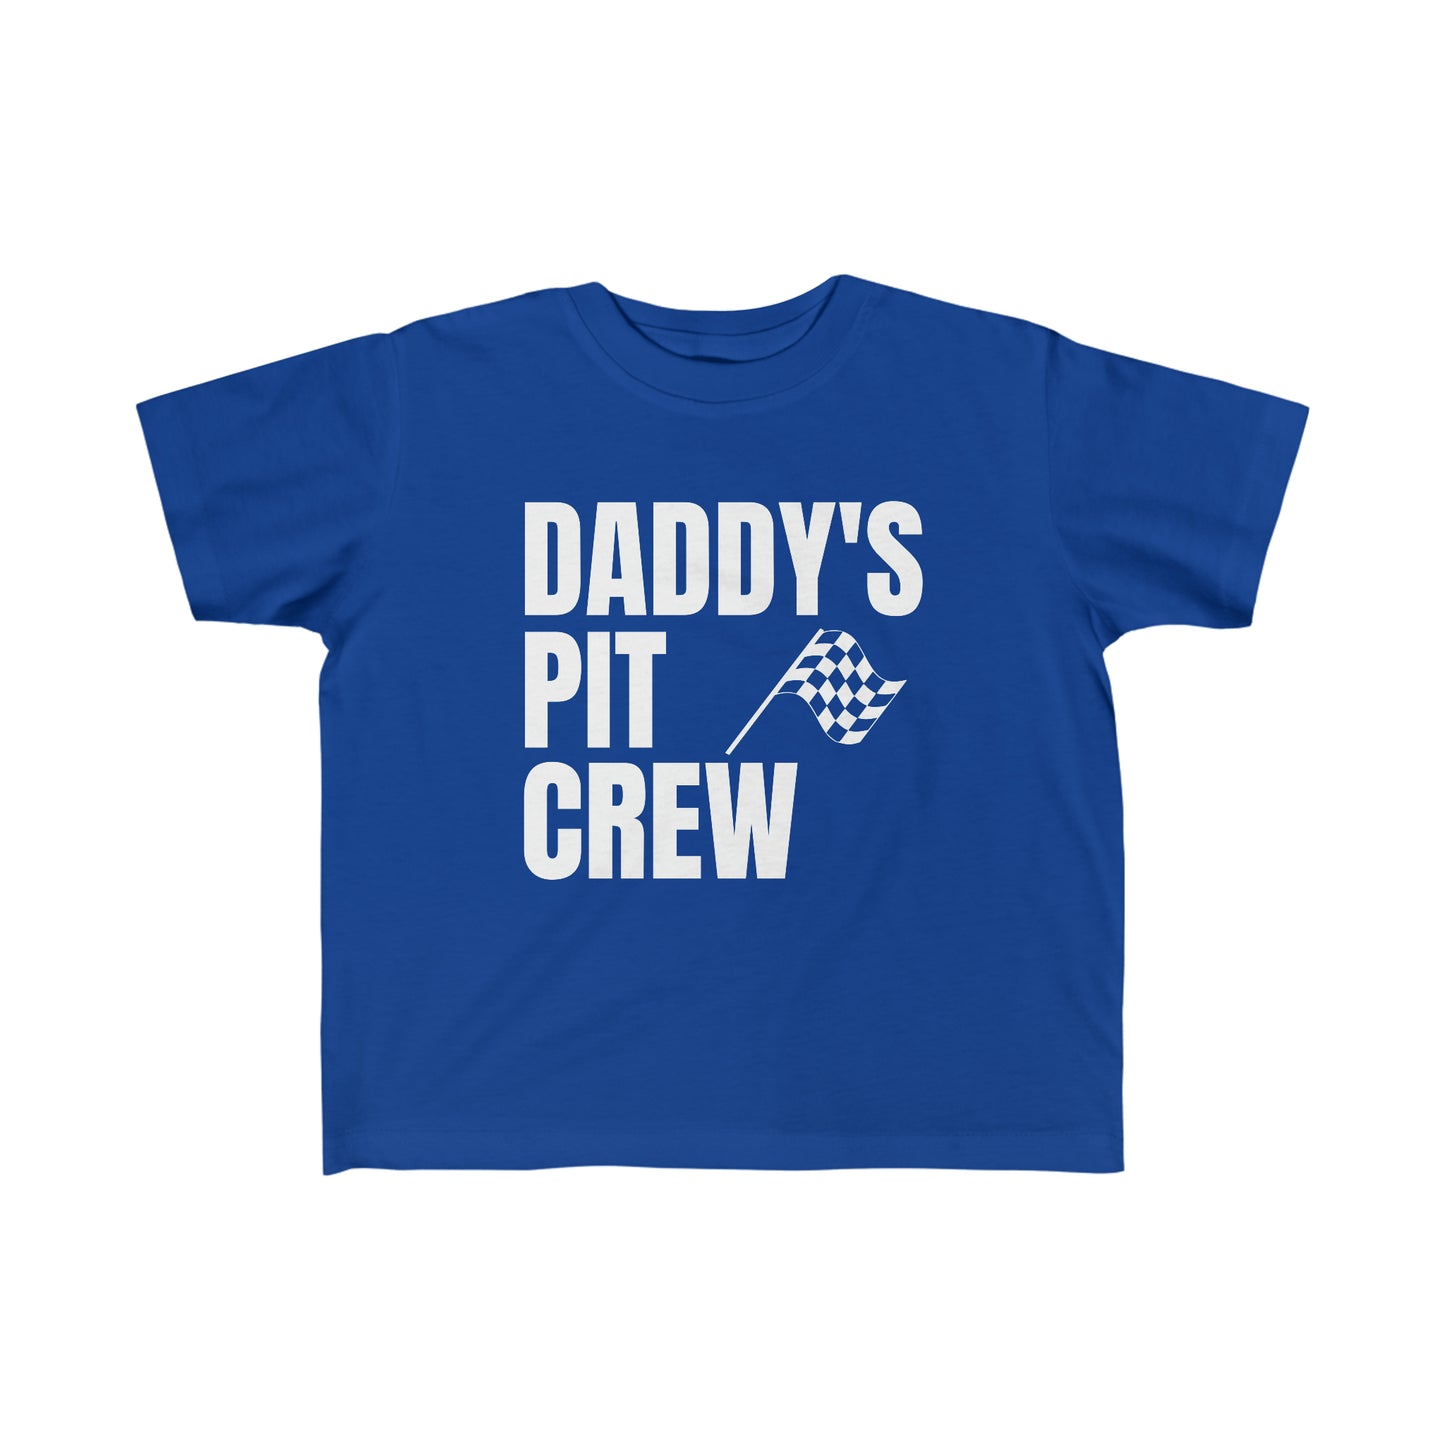 Daddy's Pit Crew Toddler's Fine Jersey Tee